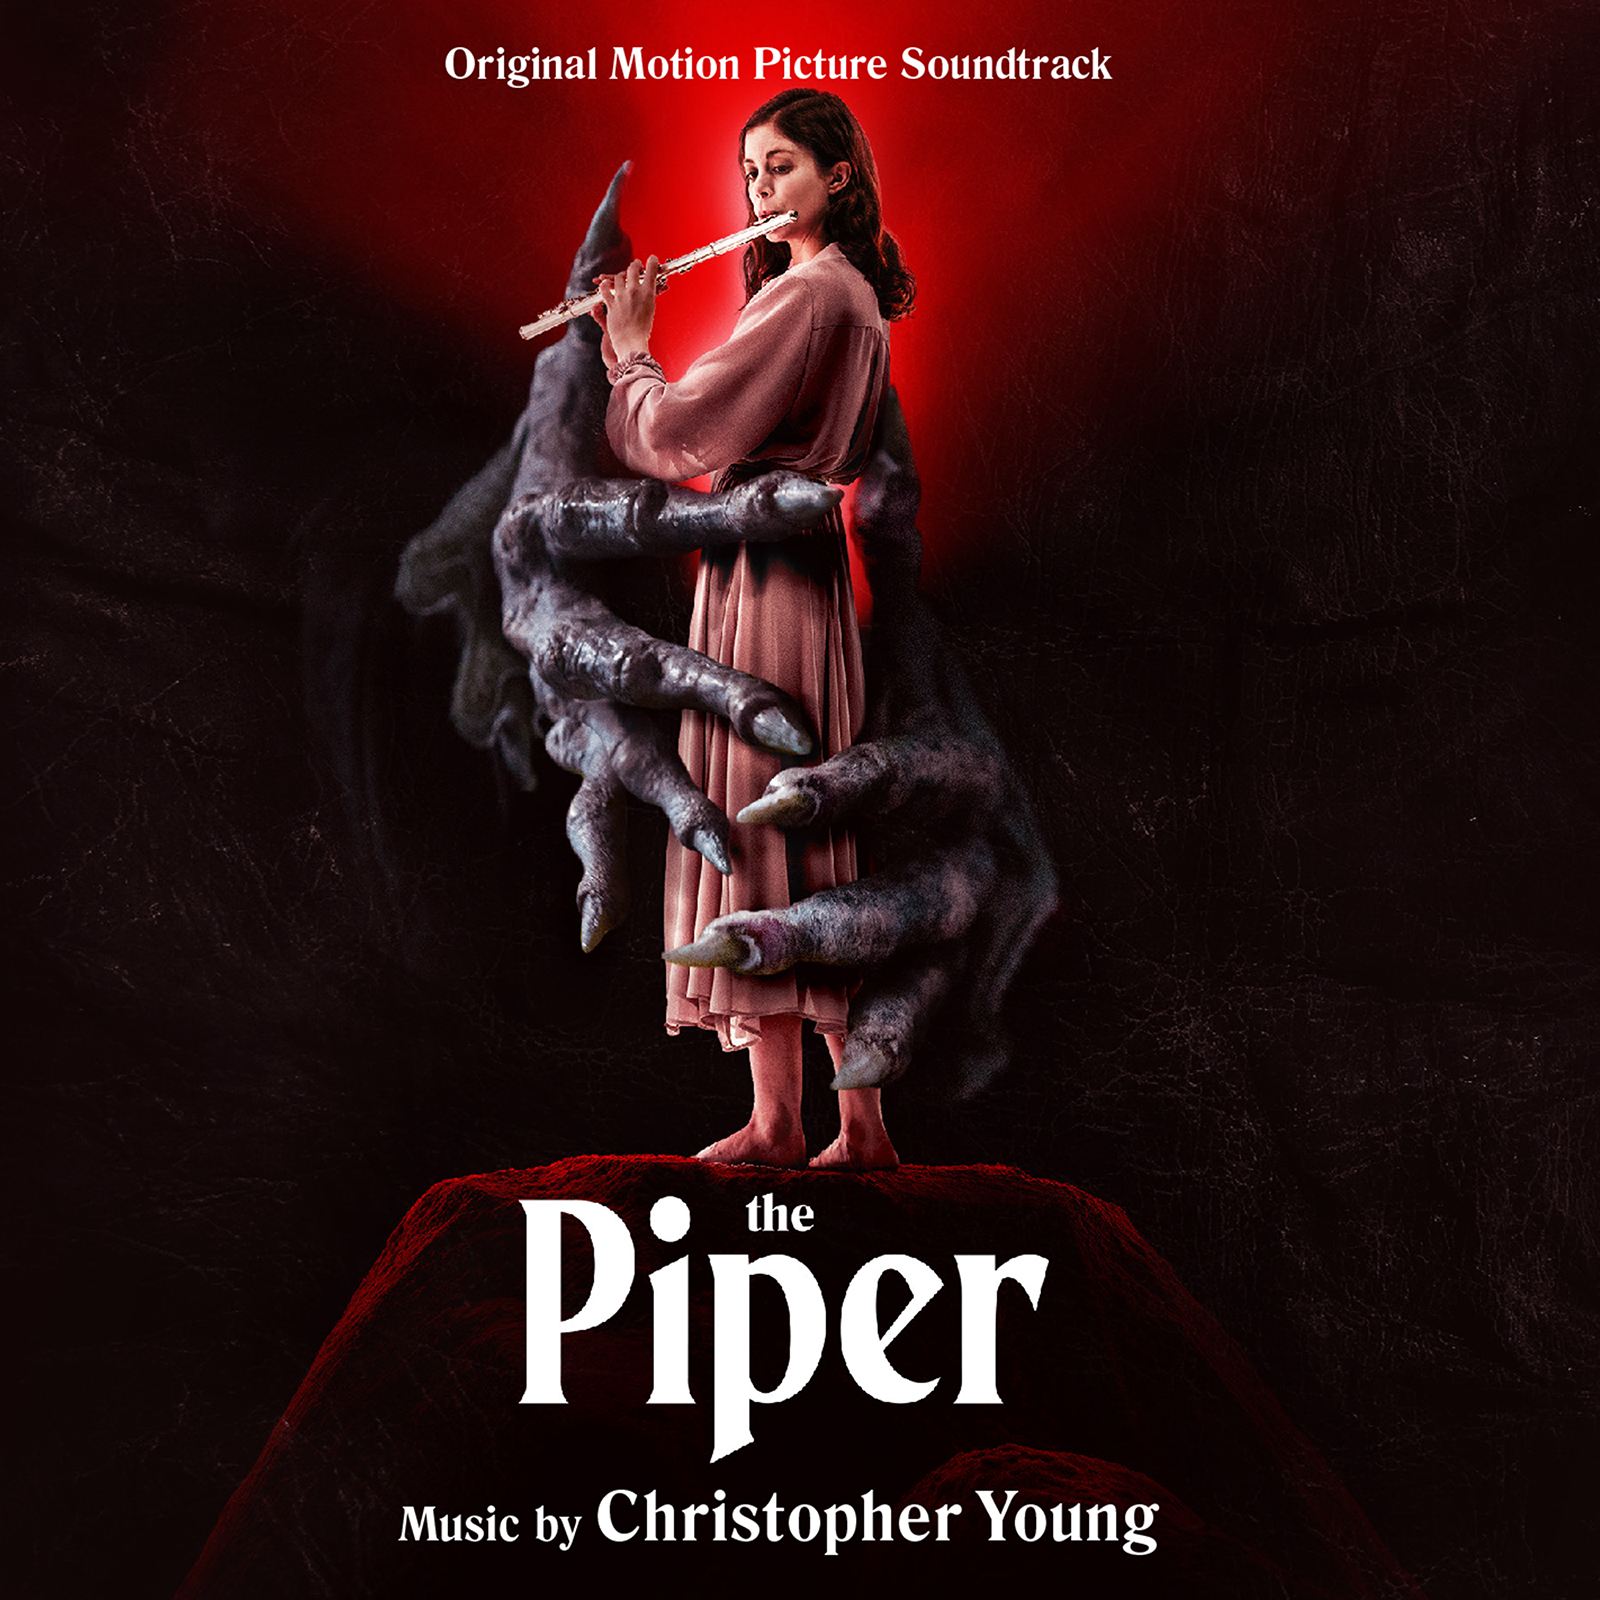 CHRISTOPHER YOUNG and ERLINGUR THORODDSEN pay THE PIPER on a new Film Music Live!